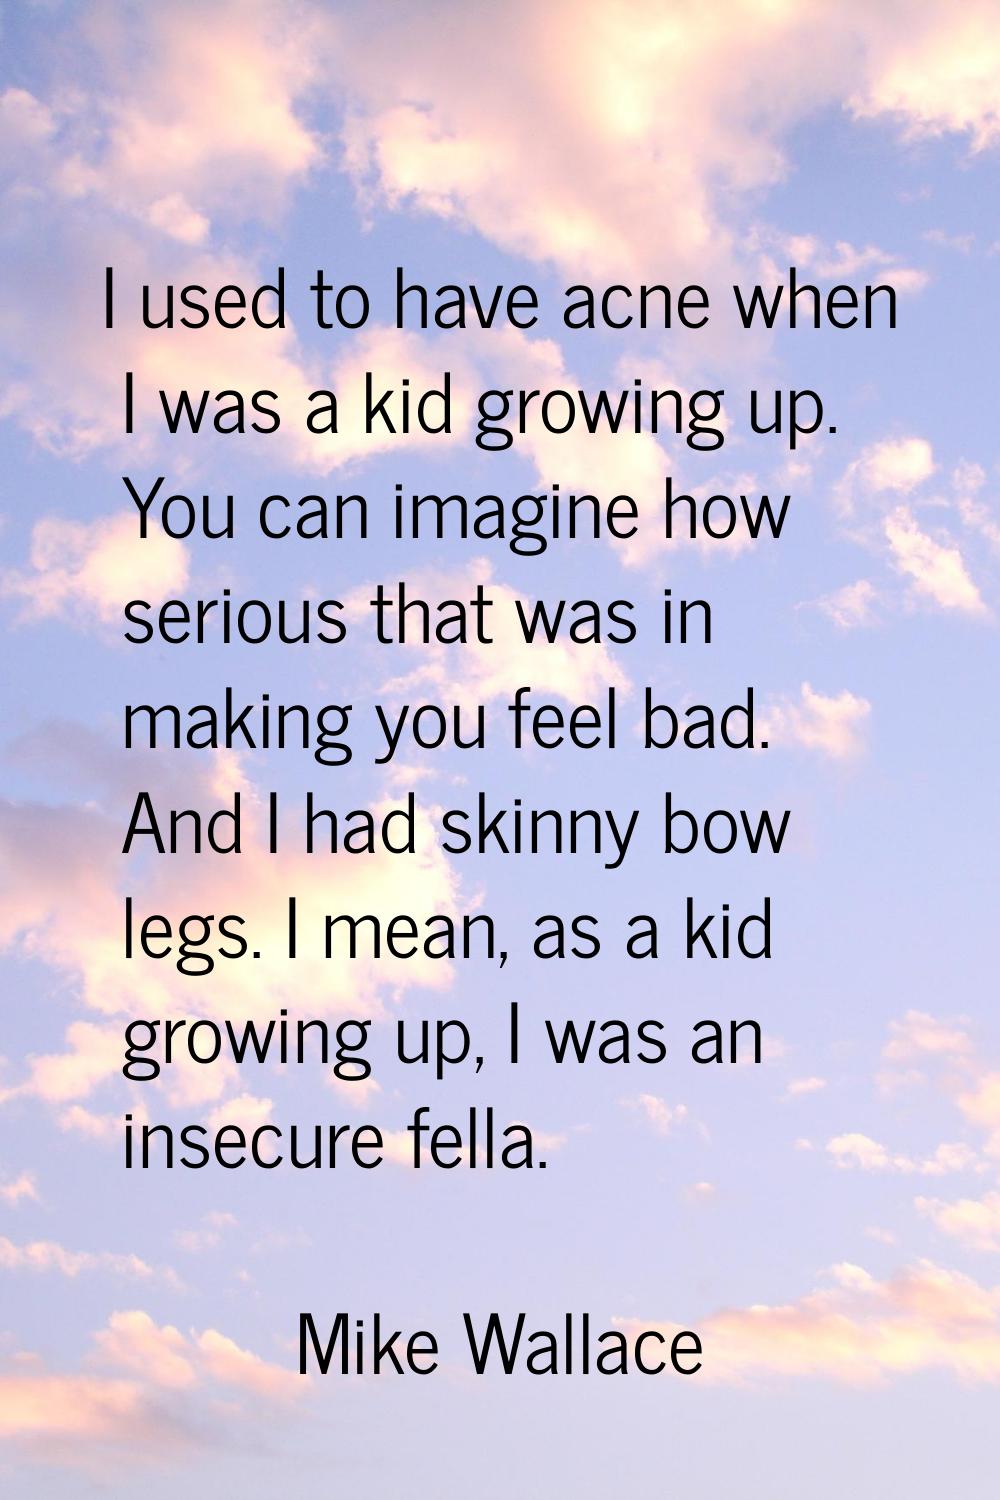 I used to have acne when I was a kid growing up. You can imagine how serious that was in making you